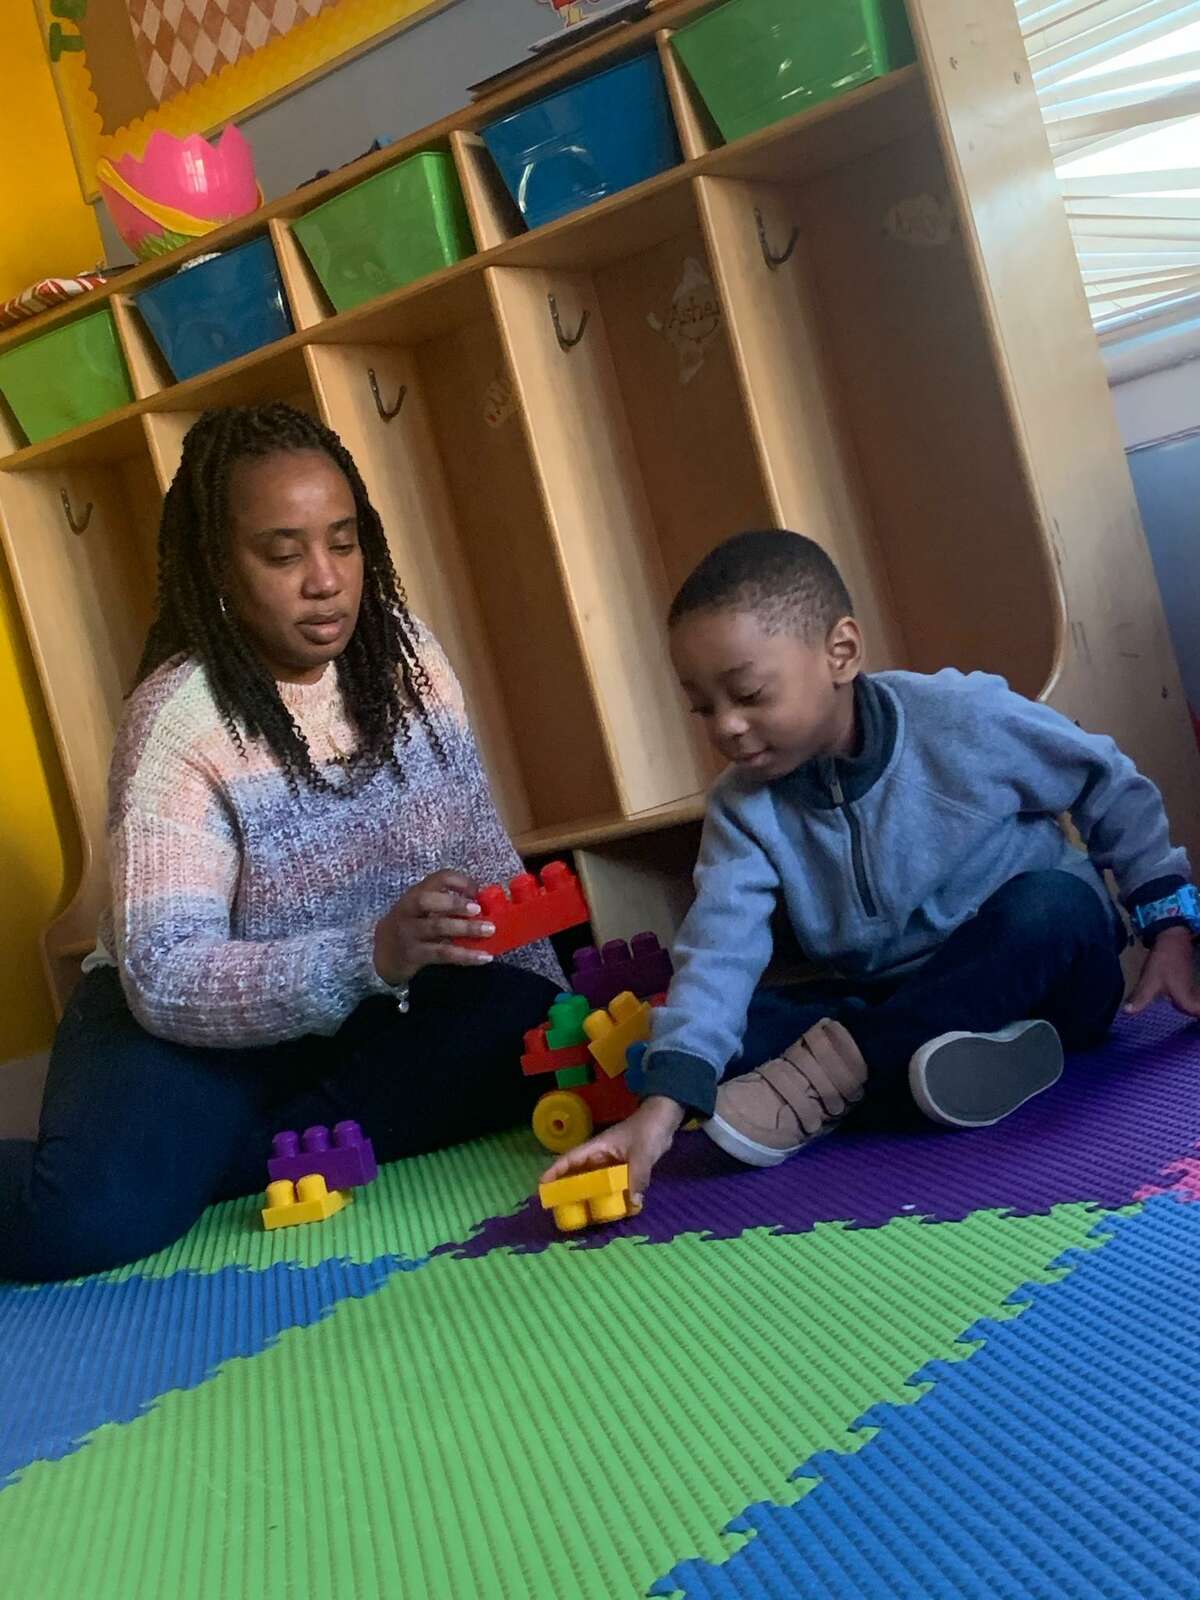 Kamara Moodie, a family child care educator for 15 years, operates 24-hour Lil Sunshine Home Daycare LLC in Bridgeport, Conn.